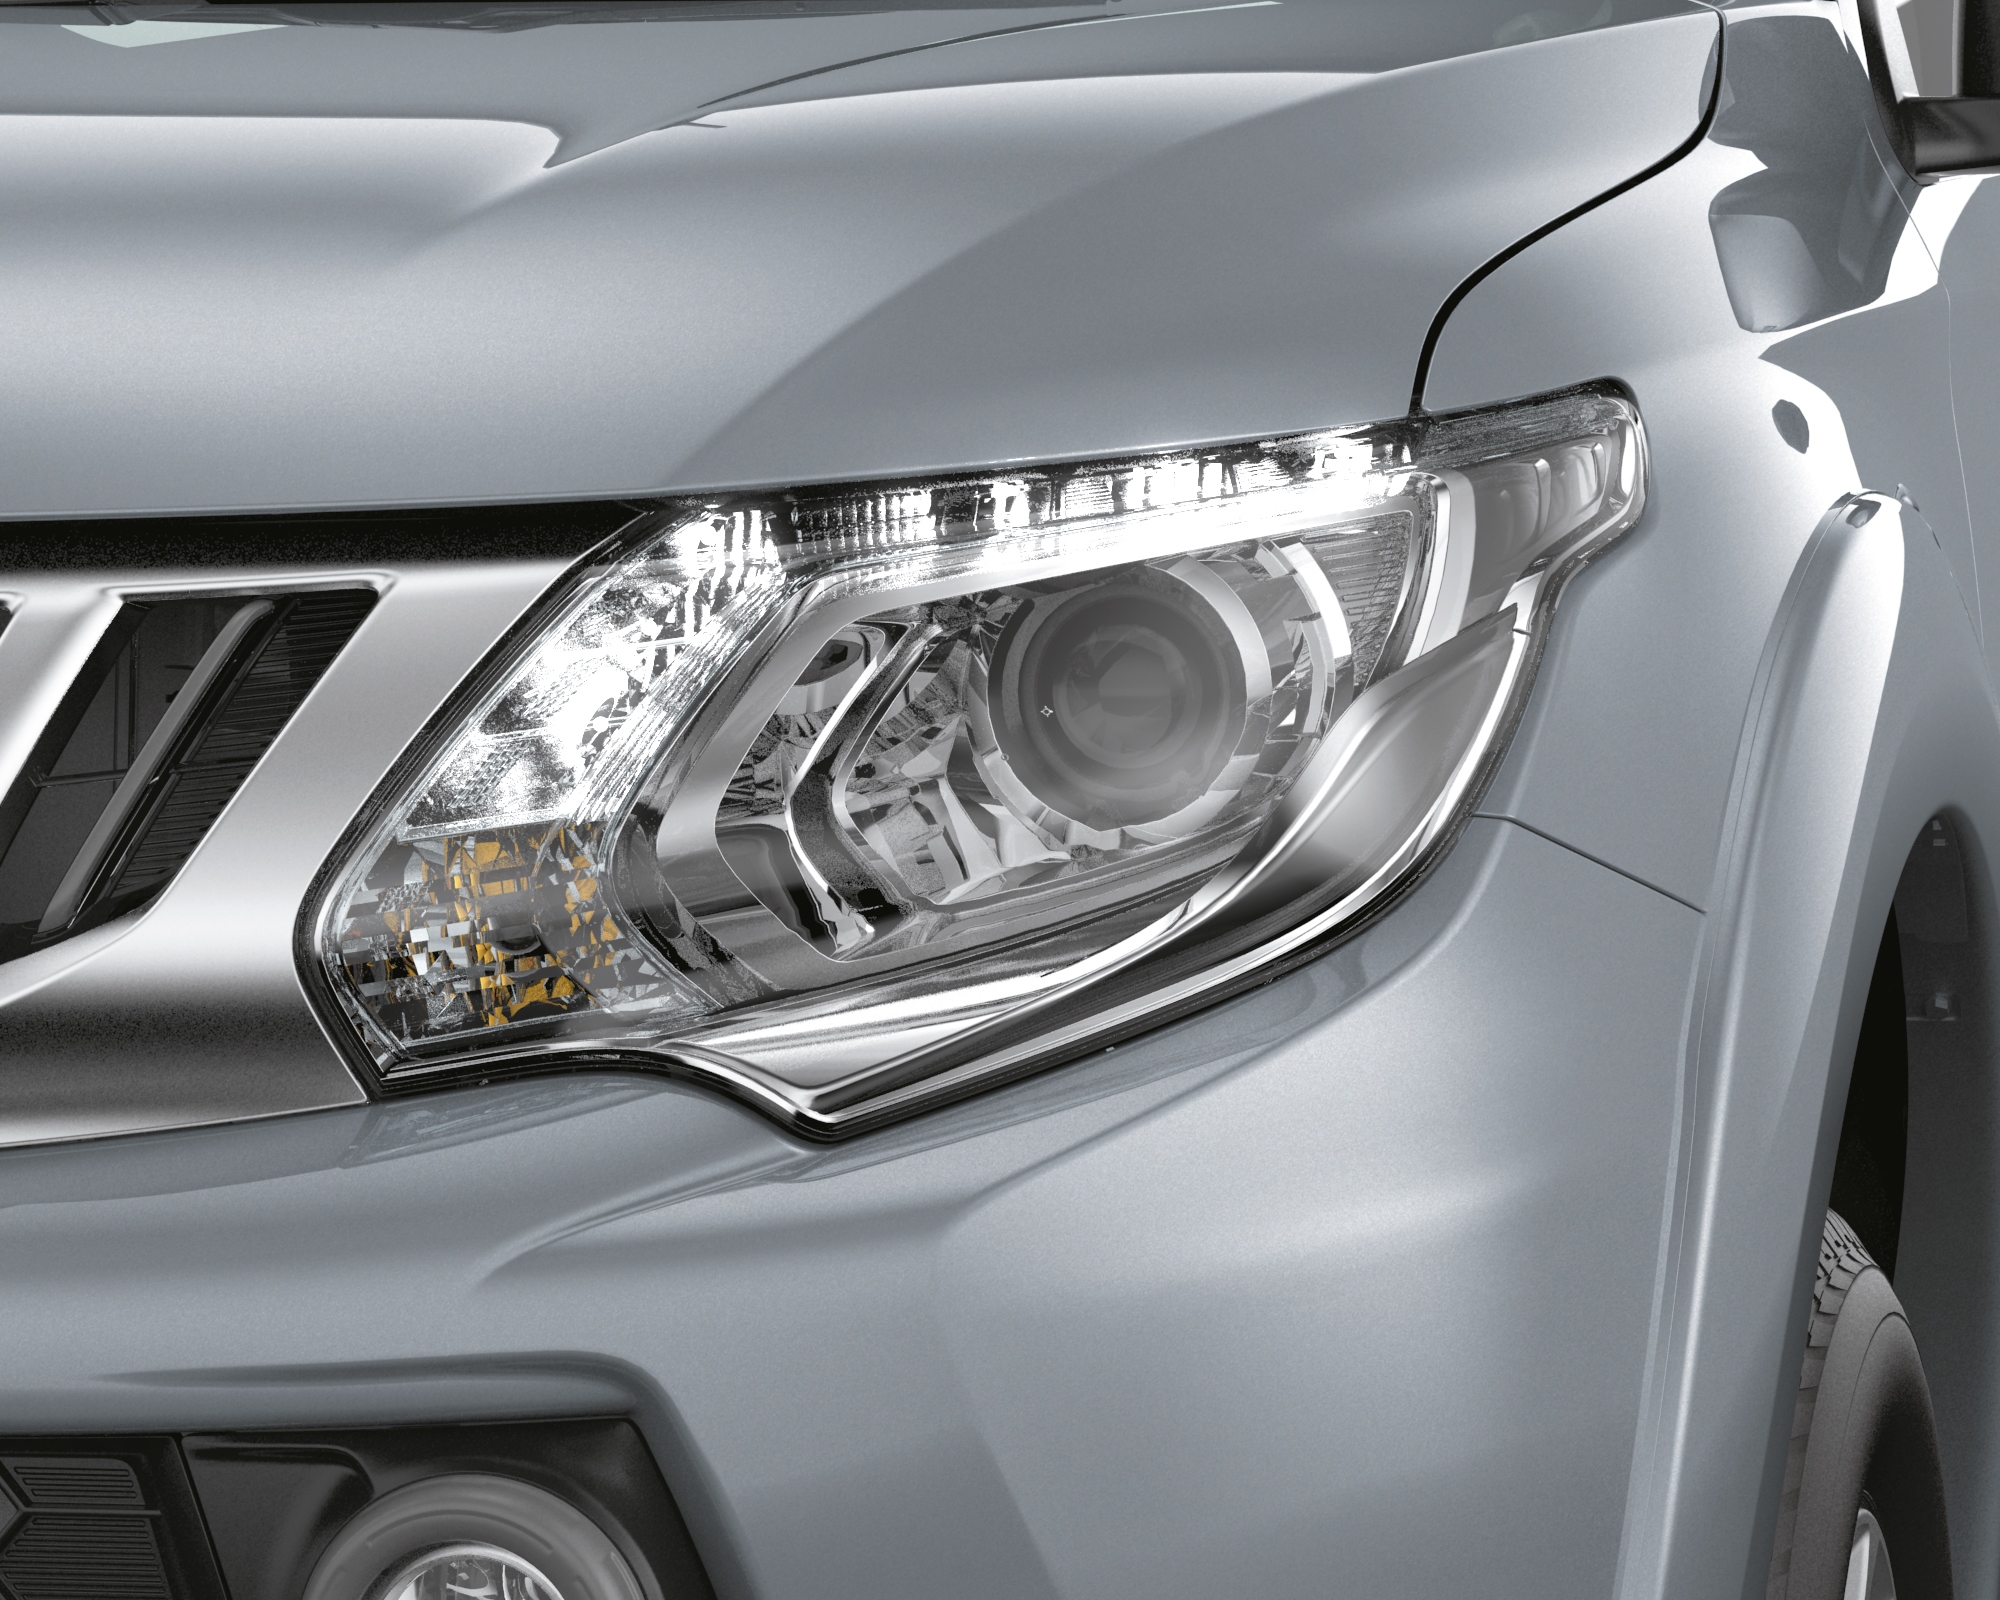 XENON HID headlamps with DRL